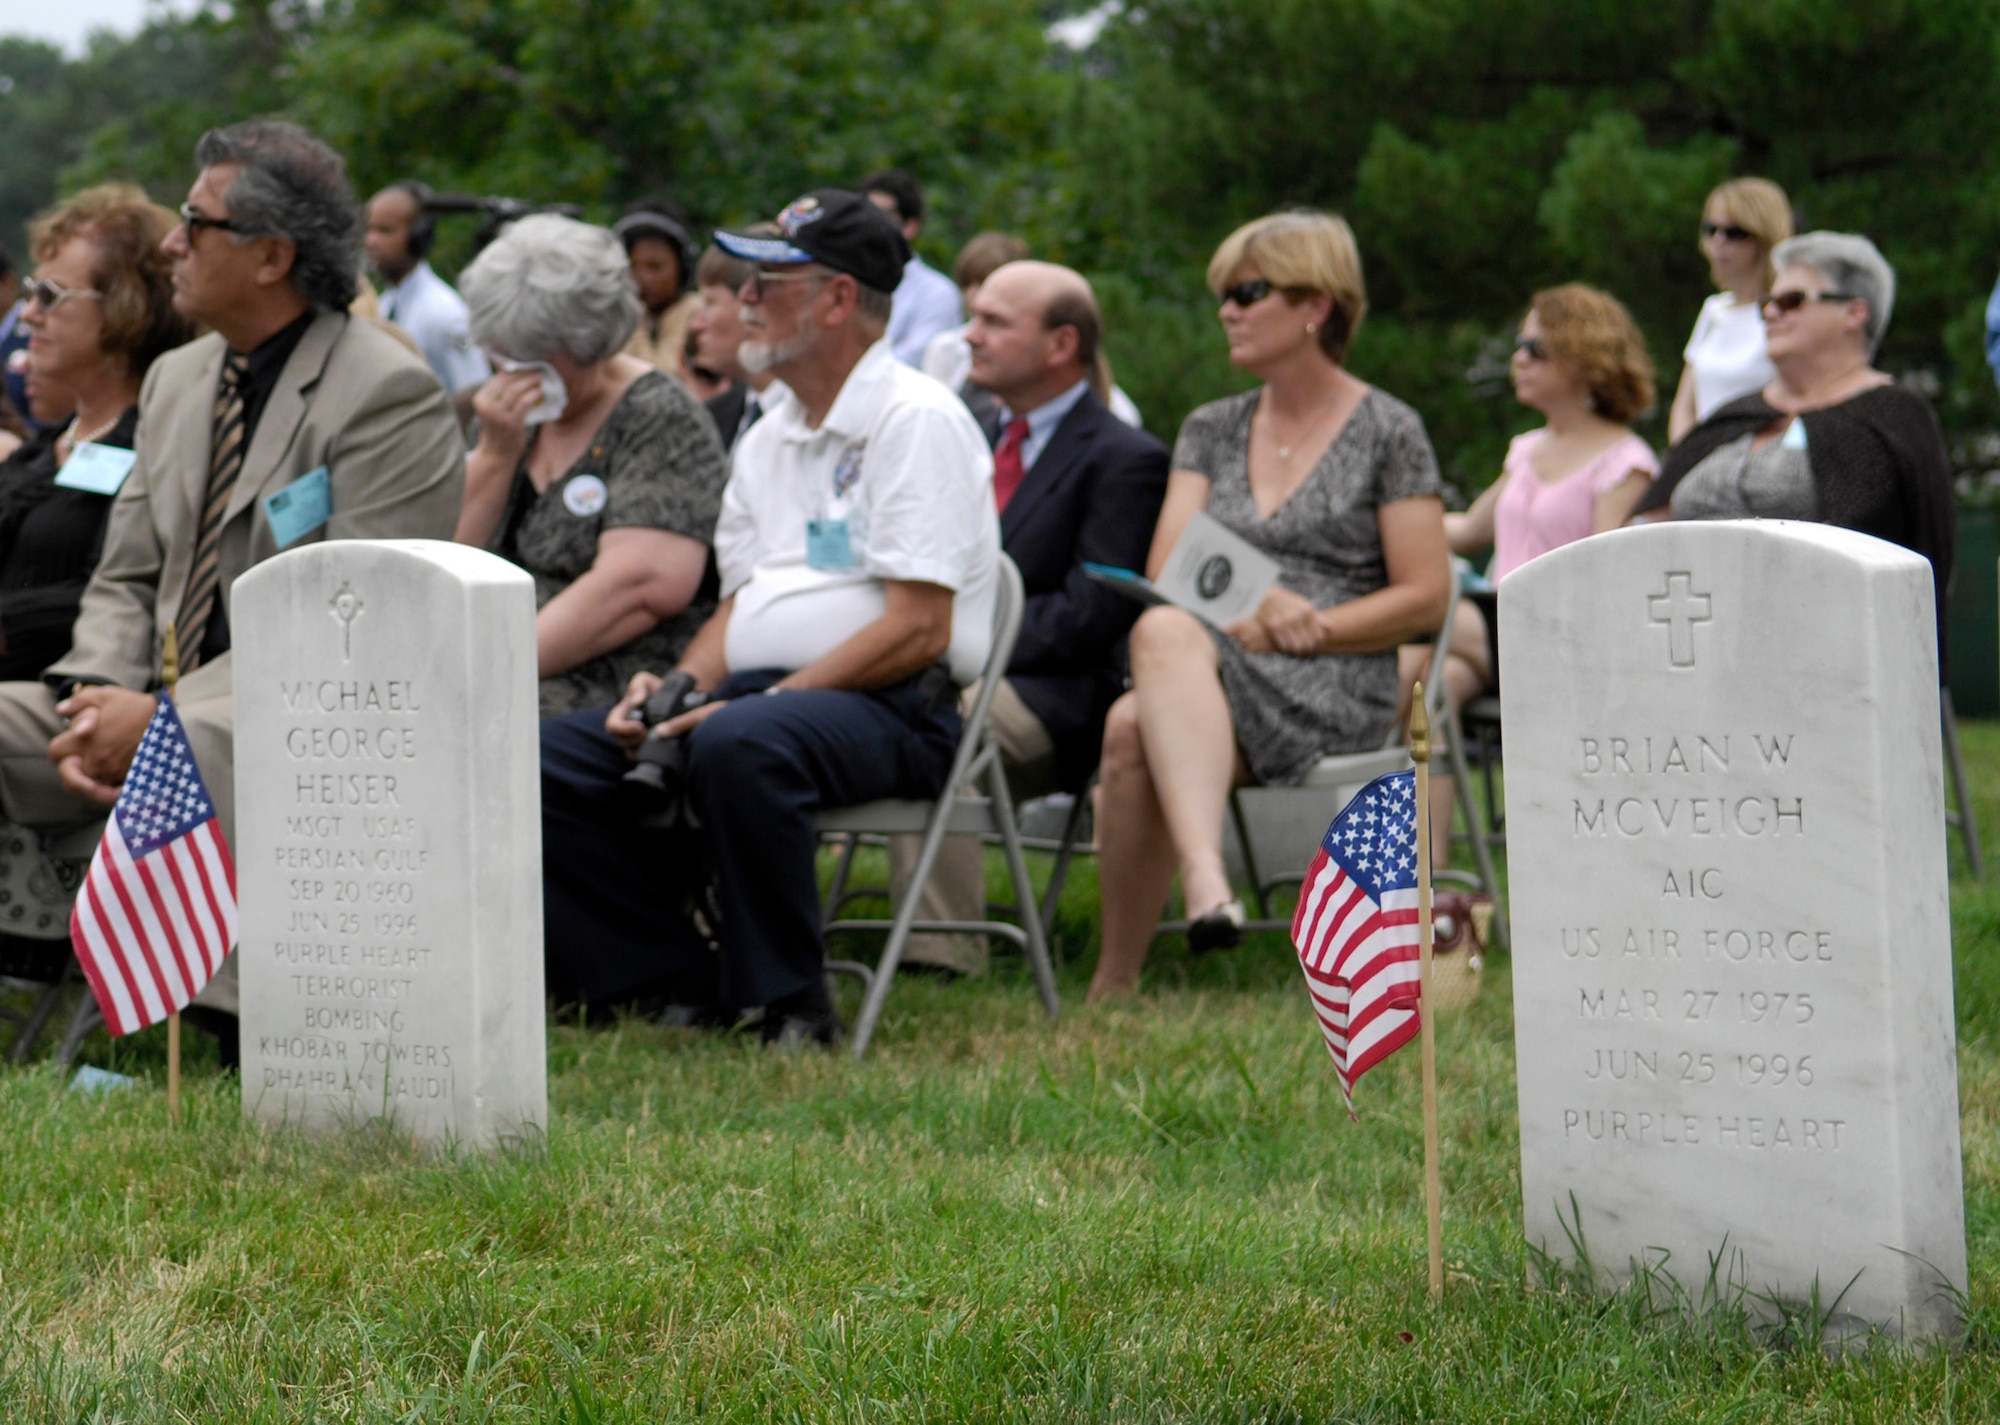 Guests listen during a remembrance ceremony, June 25, 2011, at Arlington National Cemetery, Va., to mark the 15th anniversary since the Khobar Towers bombing. In the foreground lie the headstones of Master Sgt. Michael George Heiser and Airman 1st Class Brian McVeigh, two of the nineteen Airmen killed in the terrorist bombing, June 25, 1996, at Dhahran Air Base, Saudi Arabia. (U.S. Air Force photo/Staff Sgt. Tiffany Trojca) 